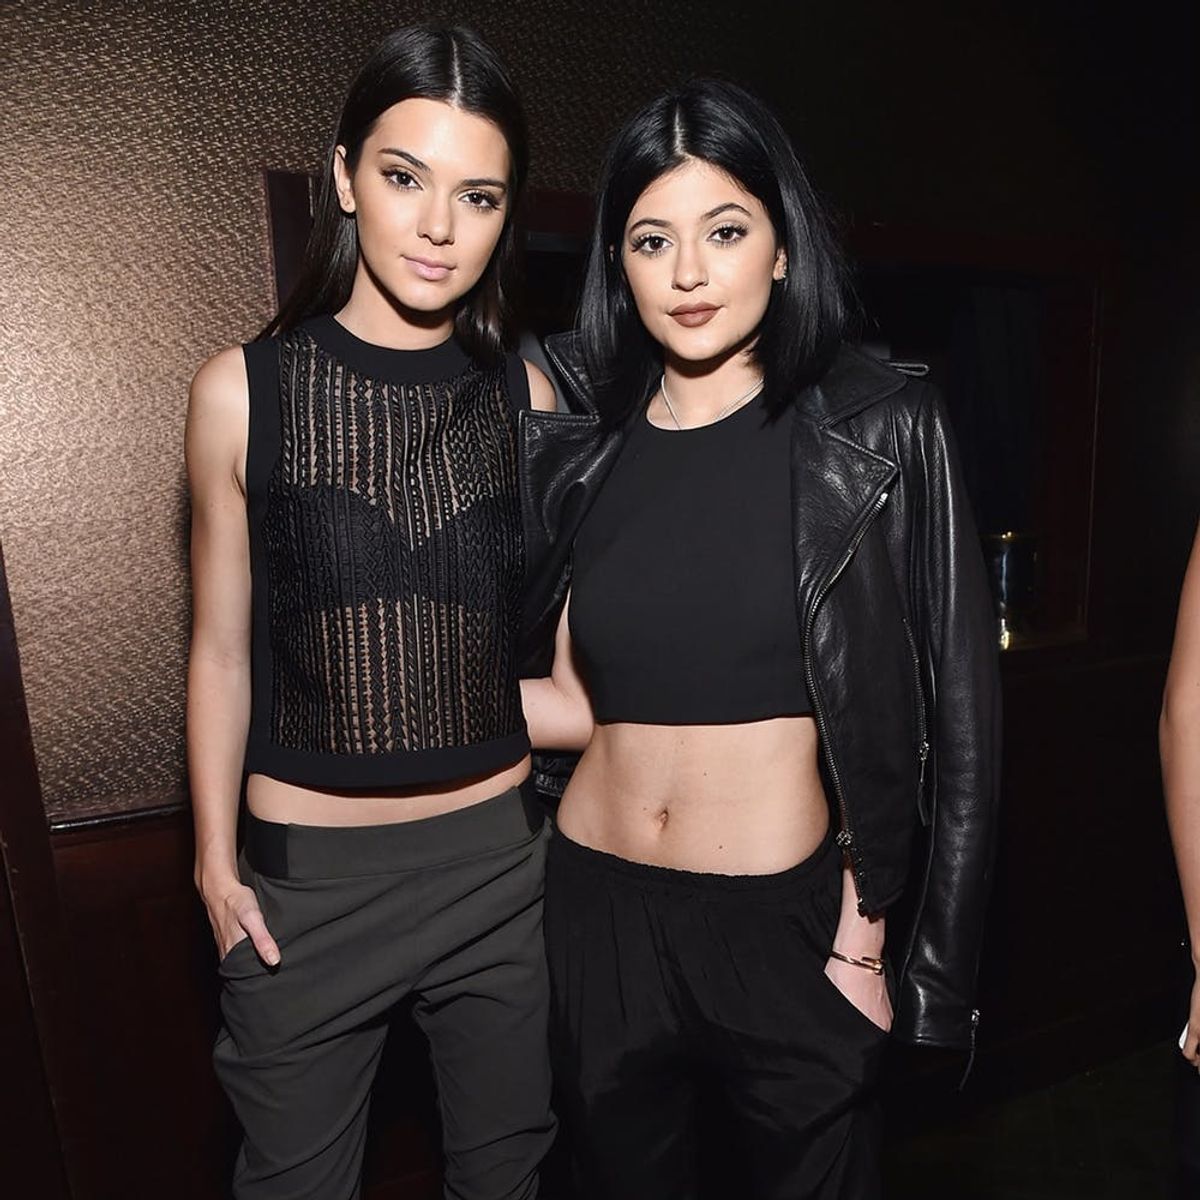 Get Your Closet Ready for Kendall + Kylie’s Epic Summer Collaboration